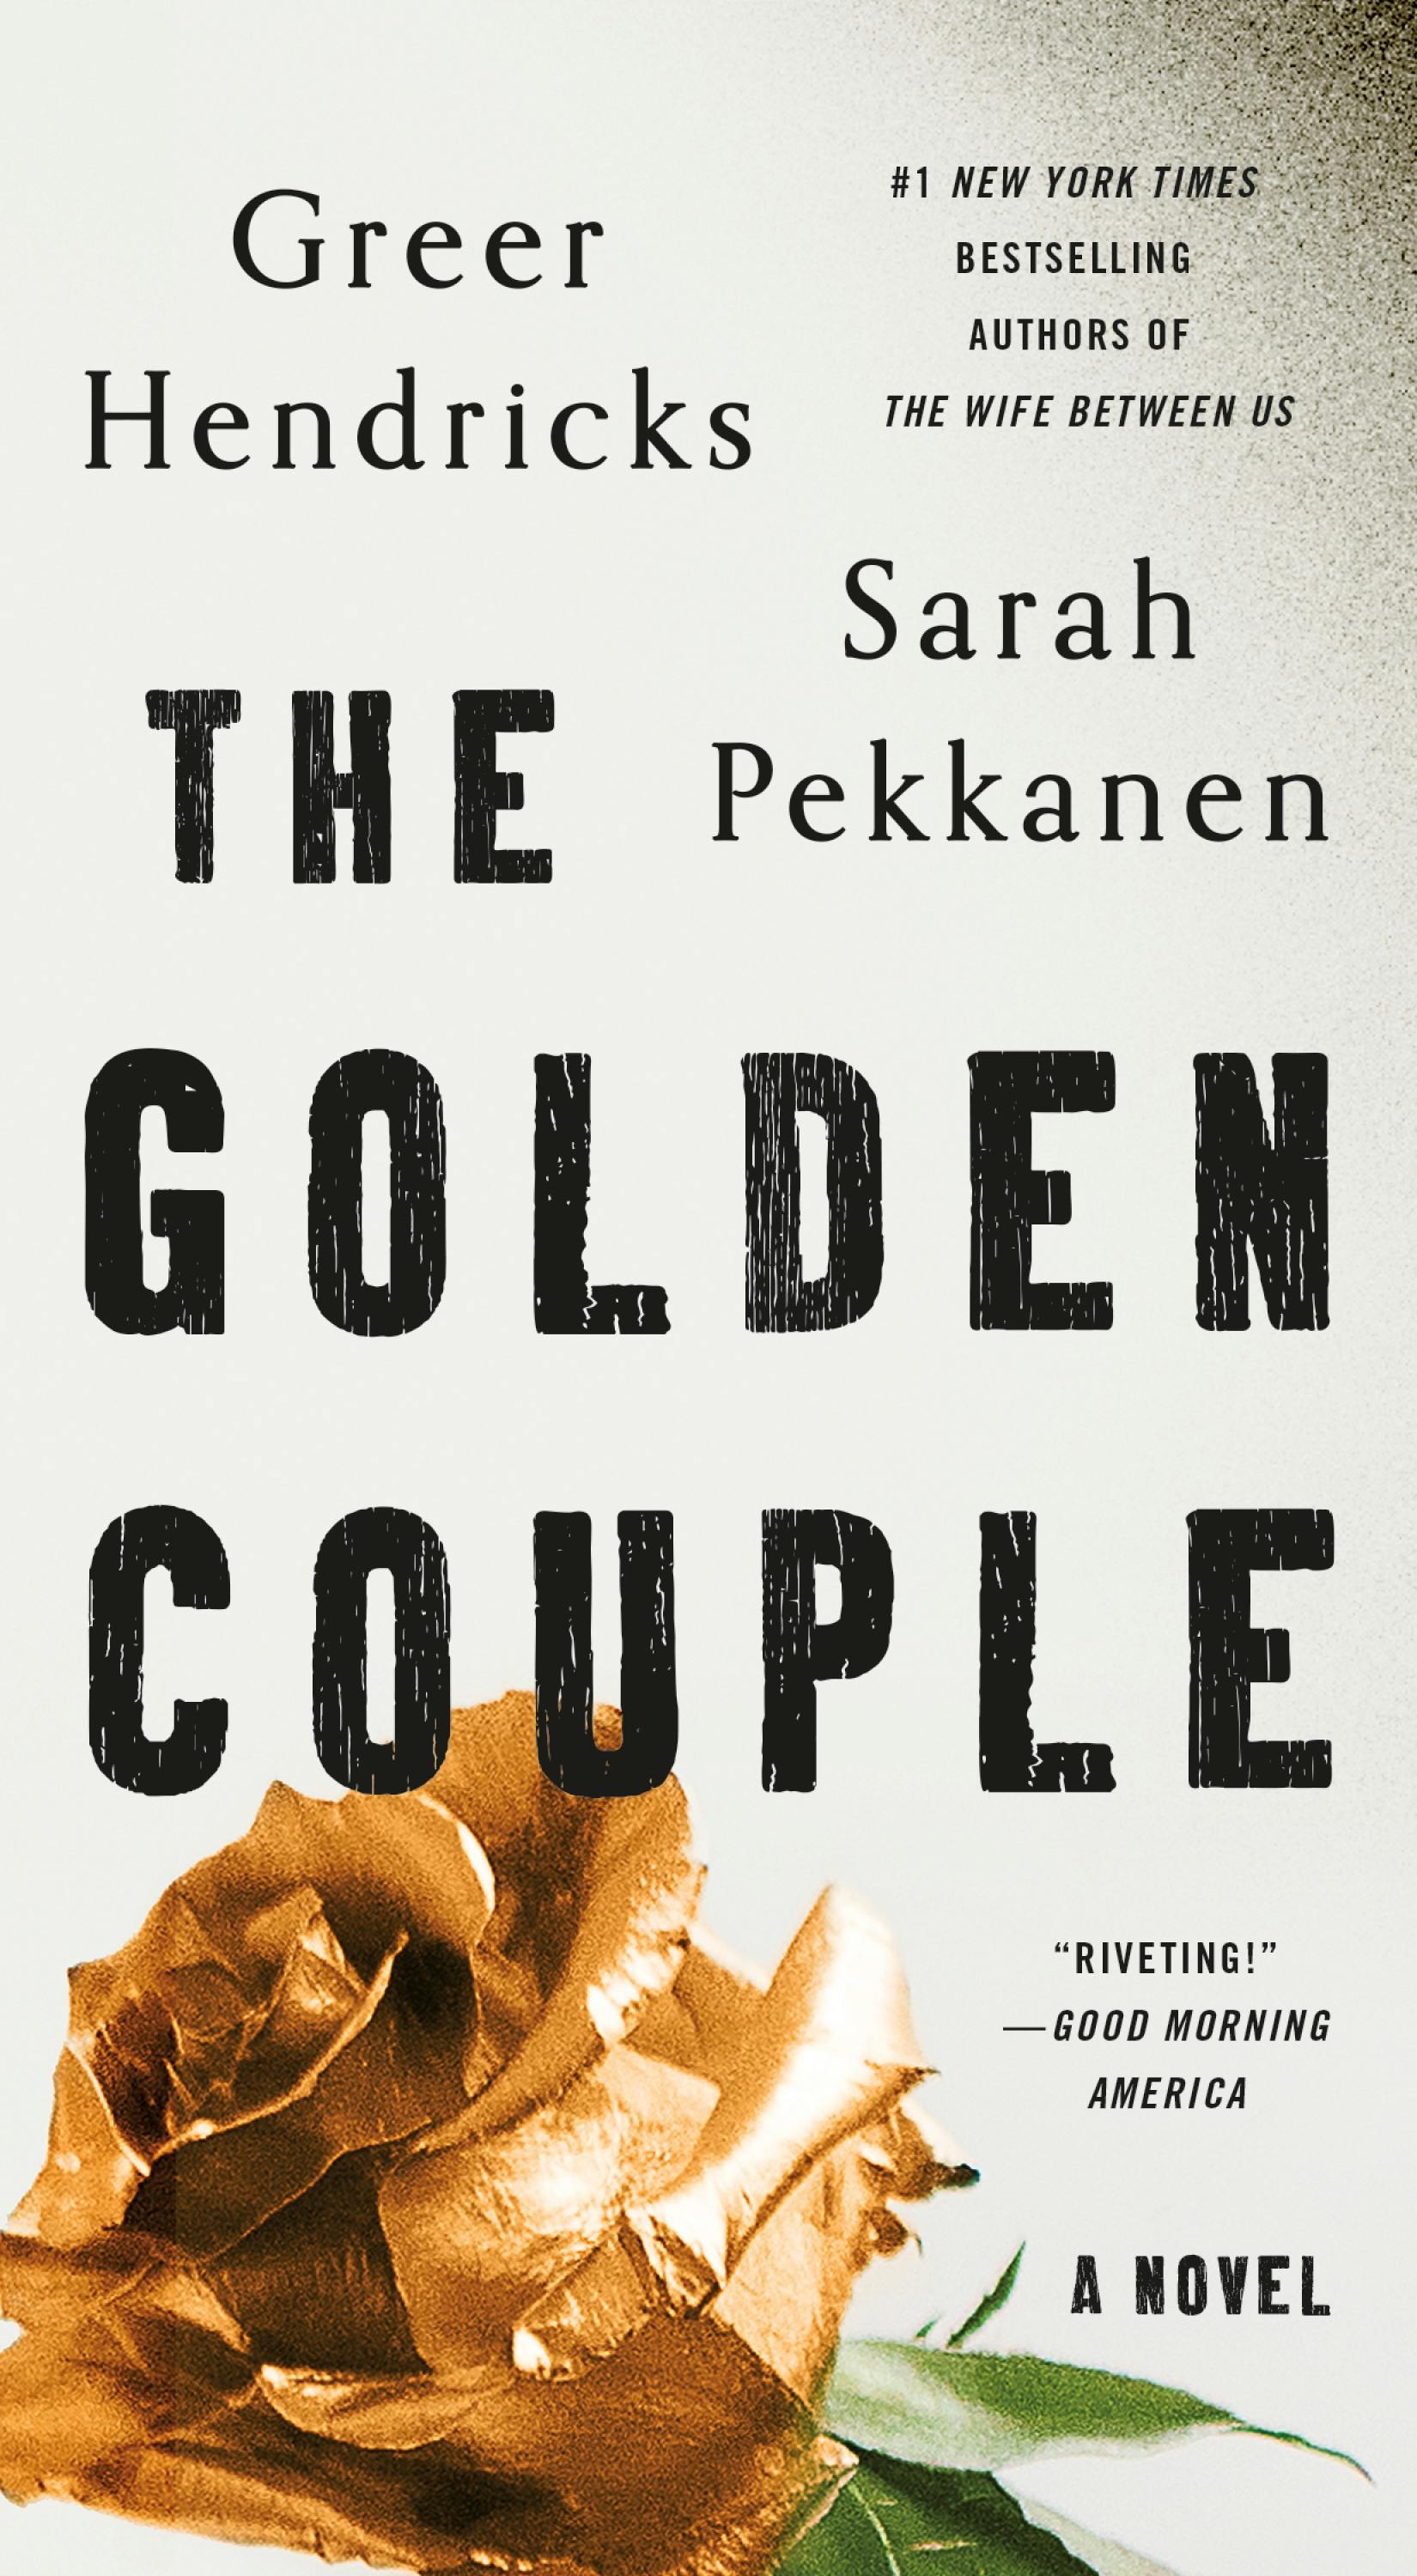 BOOK REVIEW: The Golden Couple by Greer Hendricks and Sarah Pekkanen  #thegoldencouple #bookreview – The PhDiva reads books